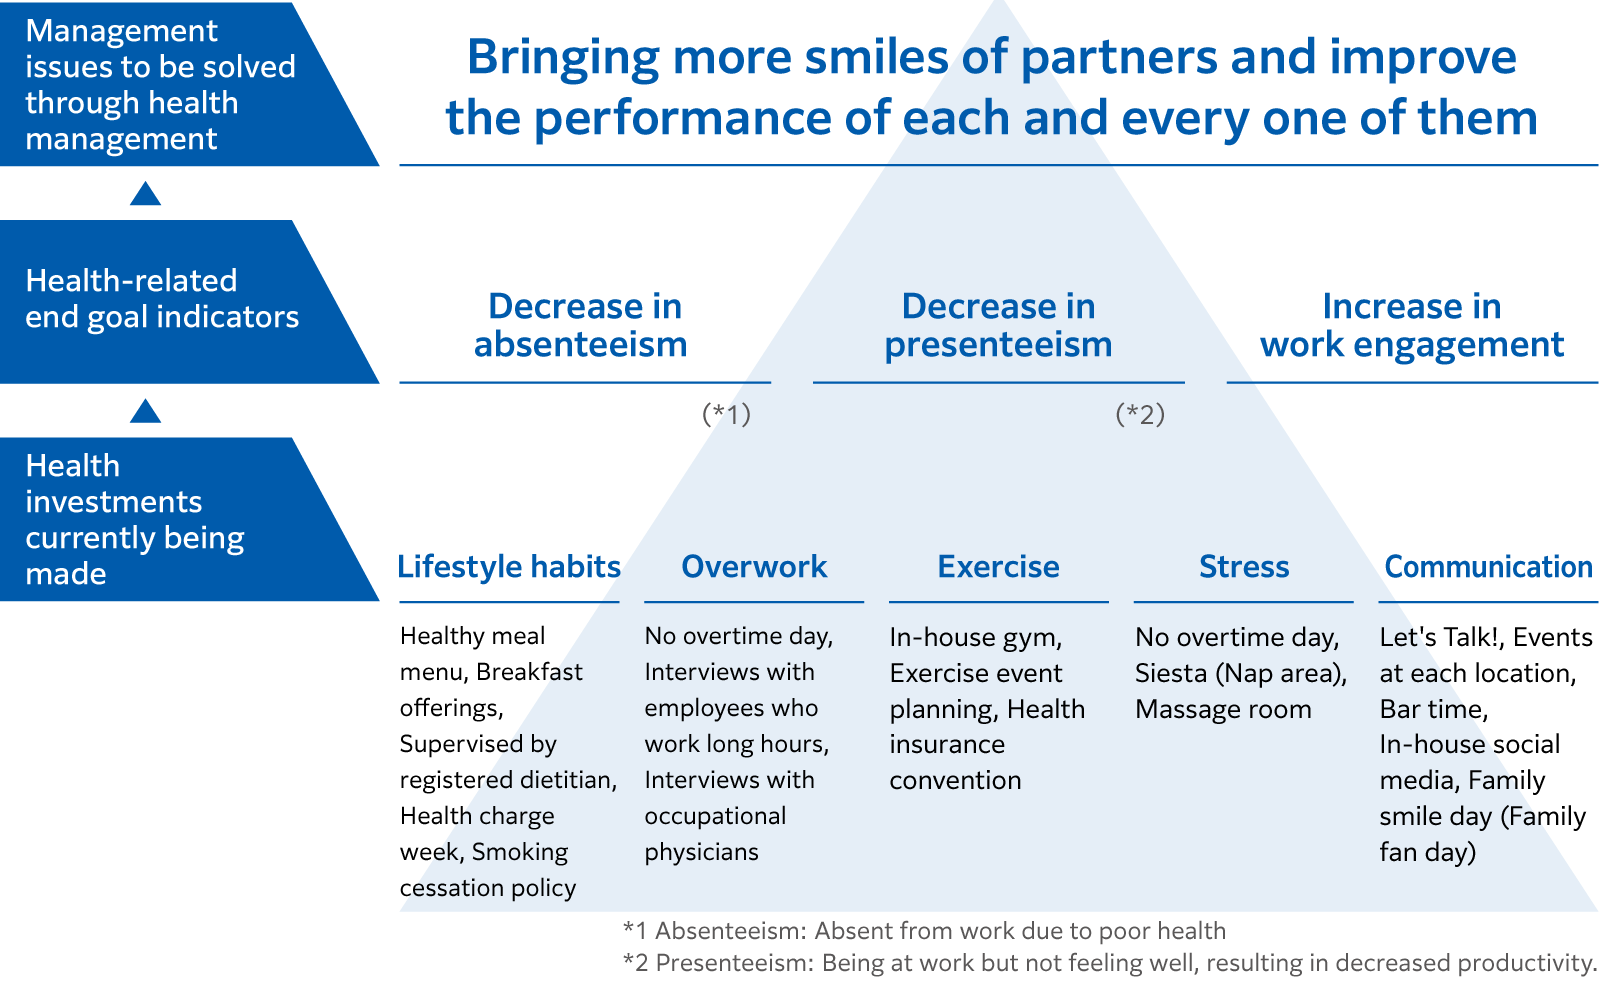 We have set our management challenge as "increasing the smiles of our partners and improving the performance of each person on the ground," and are investing in health by improving lifestyle and countermeasures against overwork in order to curb the decline in productivity due to absence from work and poor health and to increase motivation.